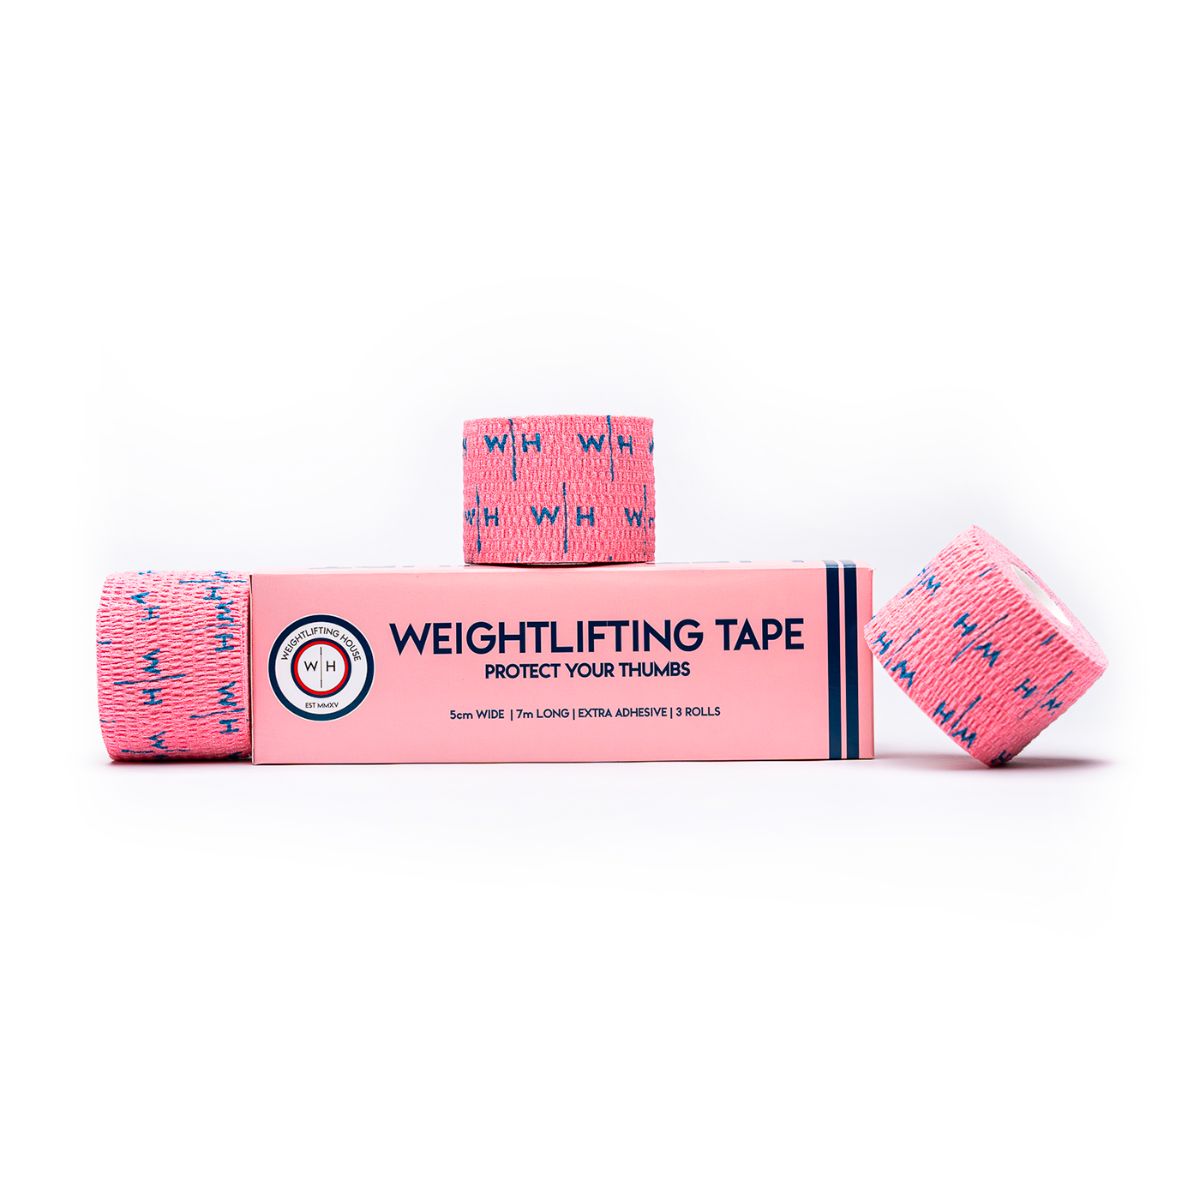 Weightlifting Thumb Tape - Box of 3 Rolls